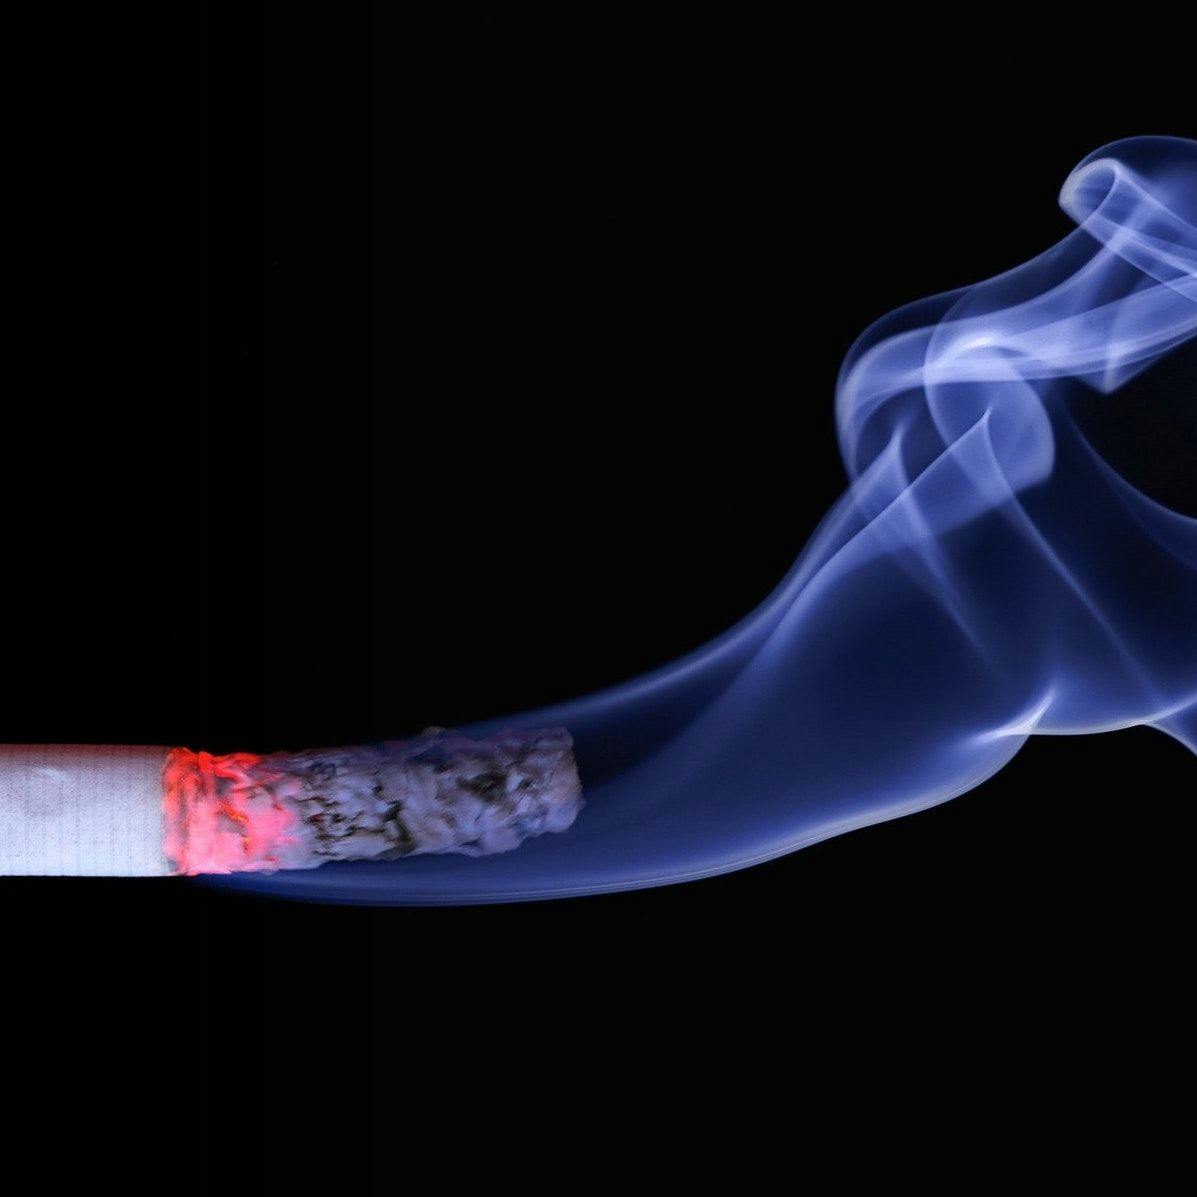 Cigarette Smoking Among US Adults Hit Record Low in 2020